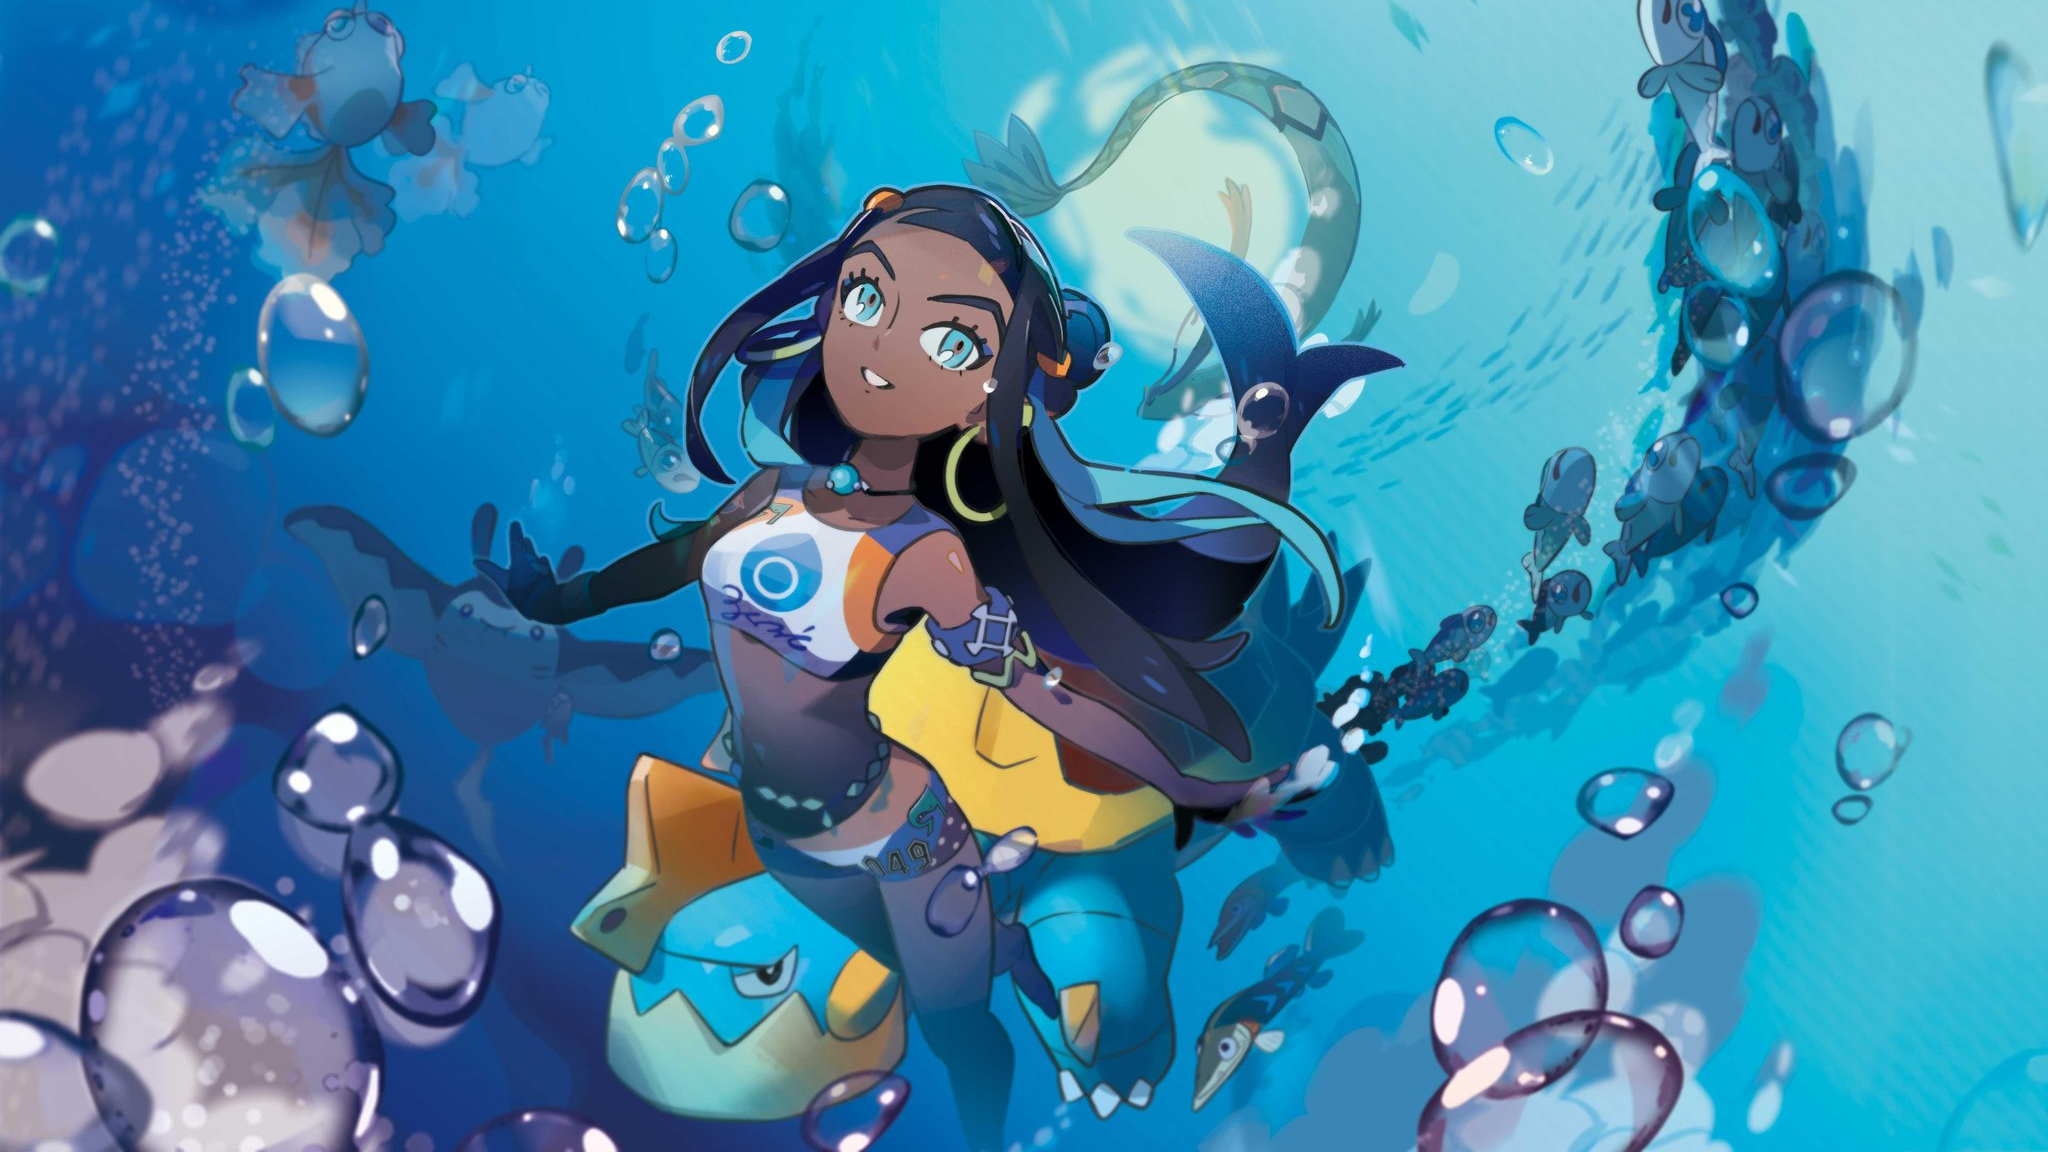 1680x1050 Nessa Pokemon Sword And Shield 1680x1050 Resolution Wallpaper Hd Anime 4k Wallpapers Images Photos And Background Wallpapers Den